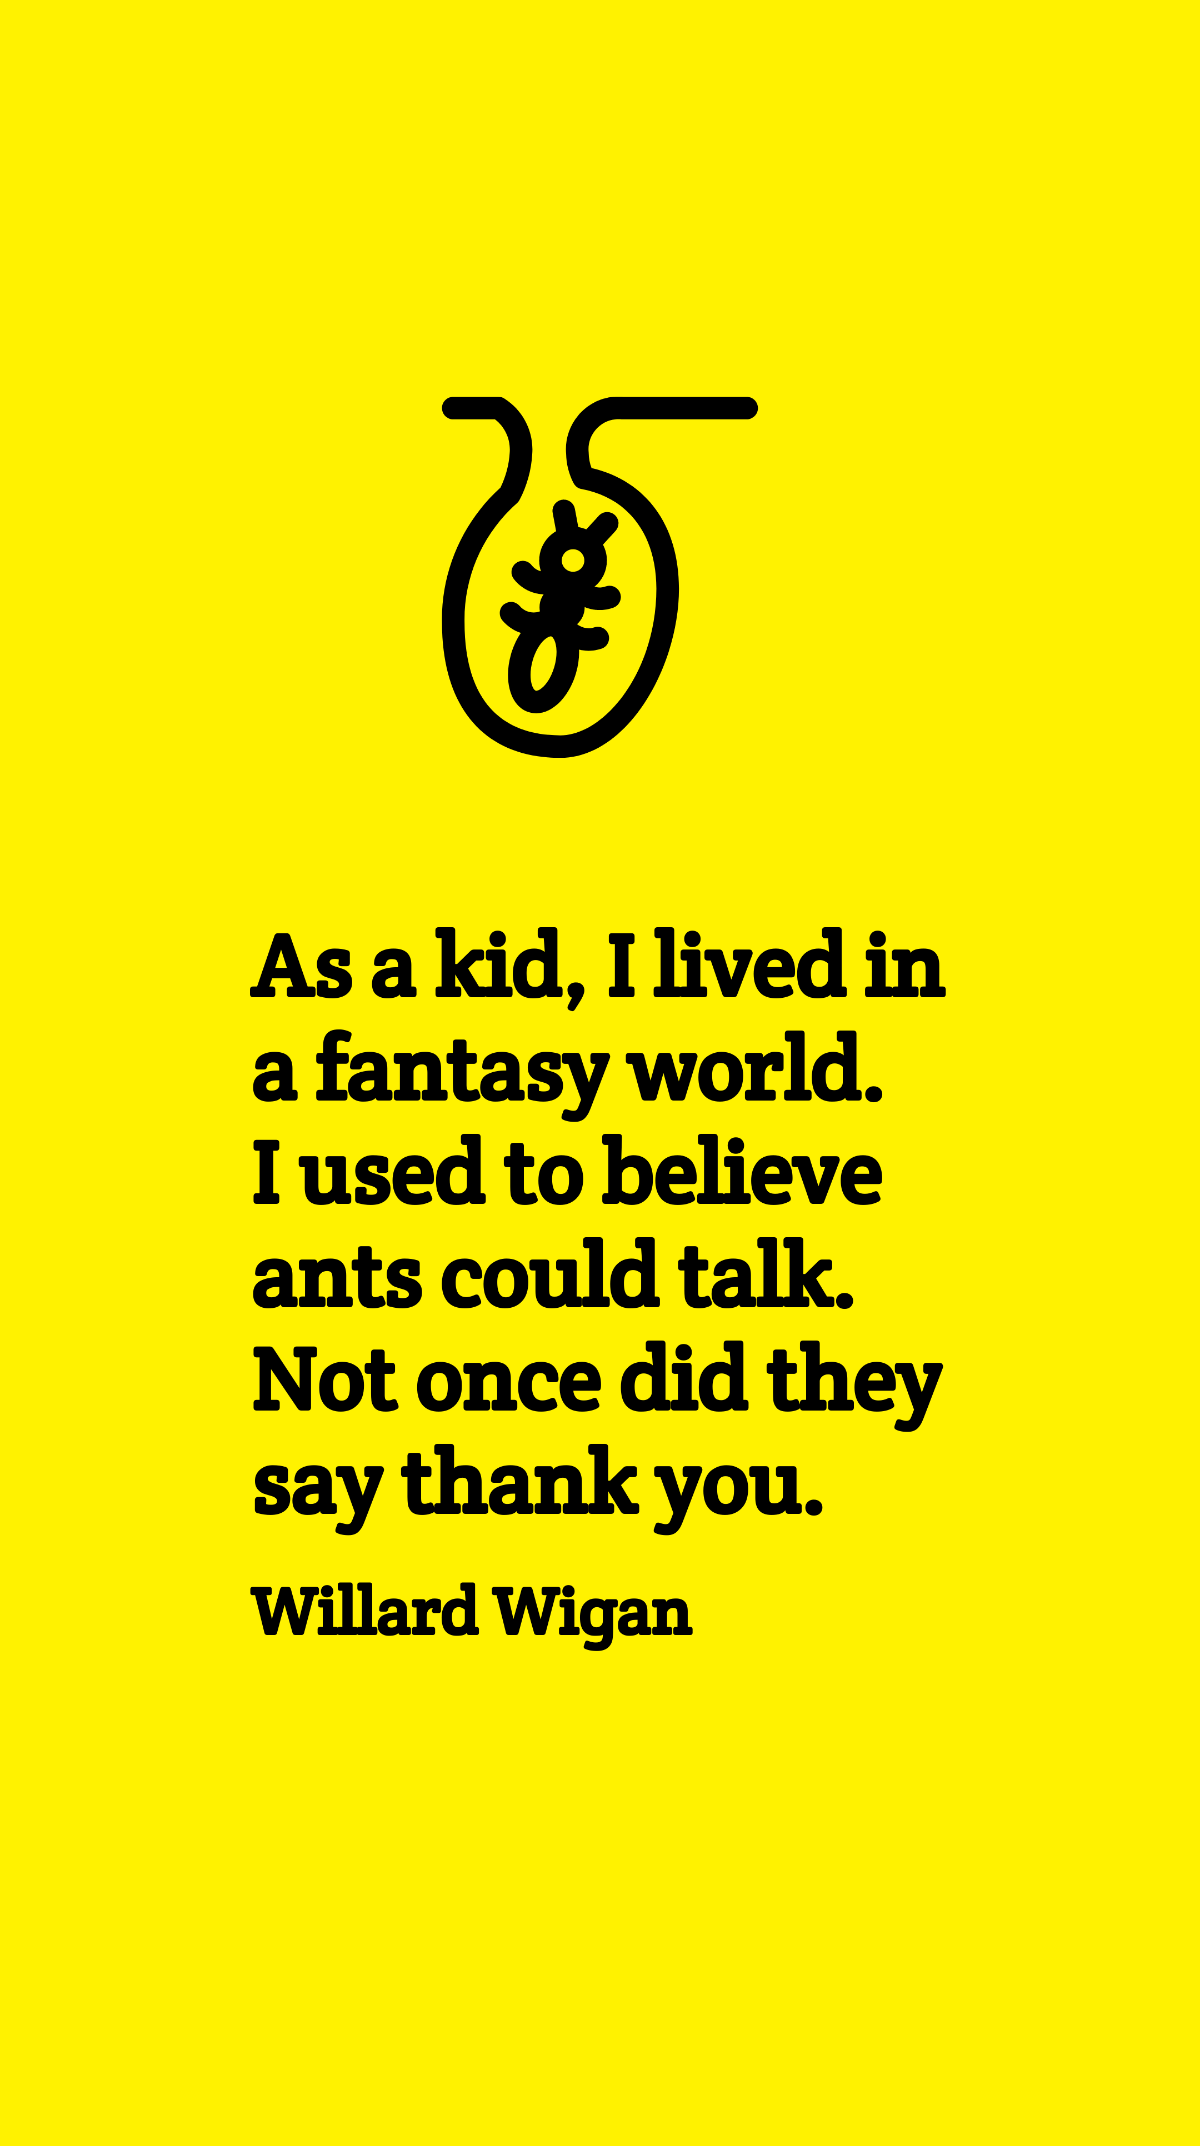 Willard Wigan - As a kid, I lived in a fantasy world. I used to believe ants could talk. Not once did they say thank you.